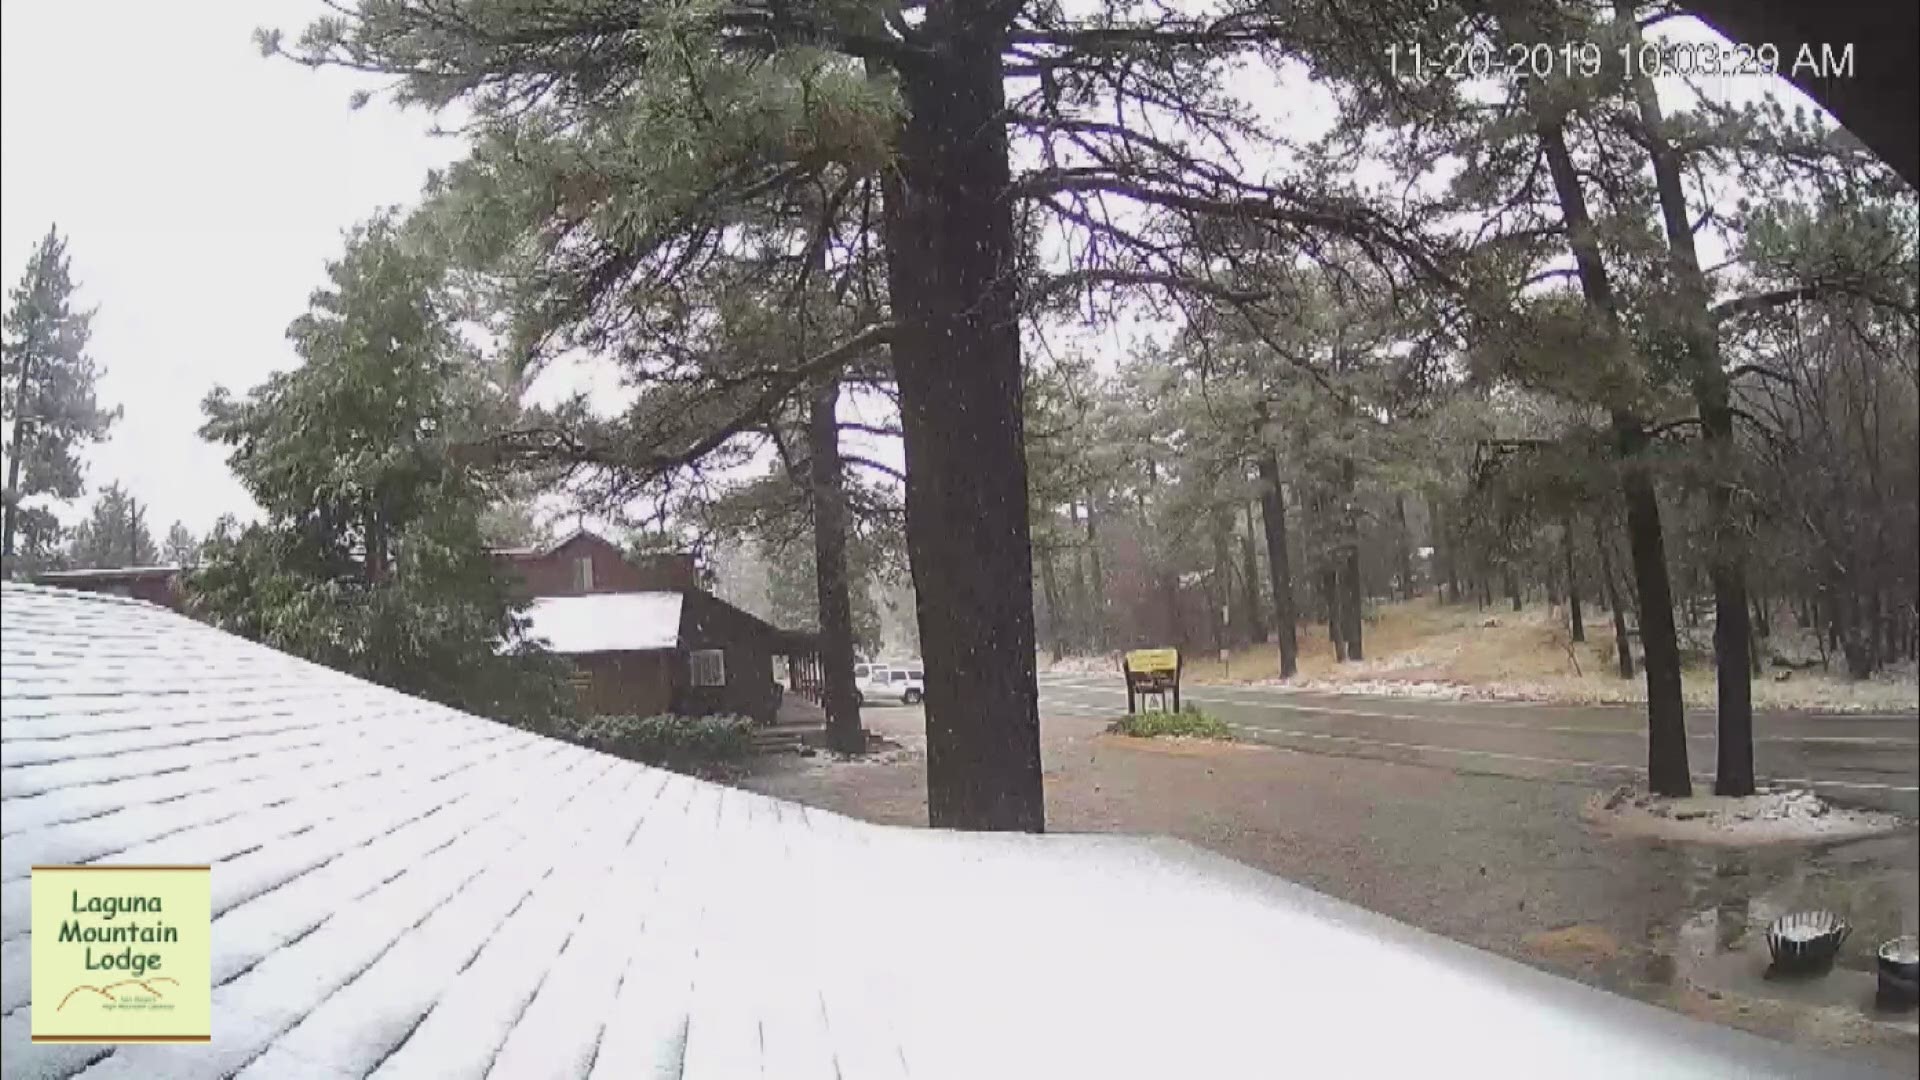 The storm also brought snow to the mountains at Laguna Mountain Lodge.